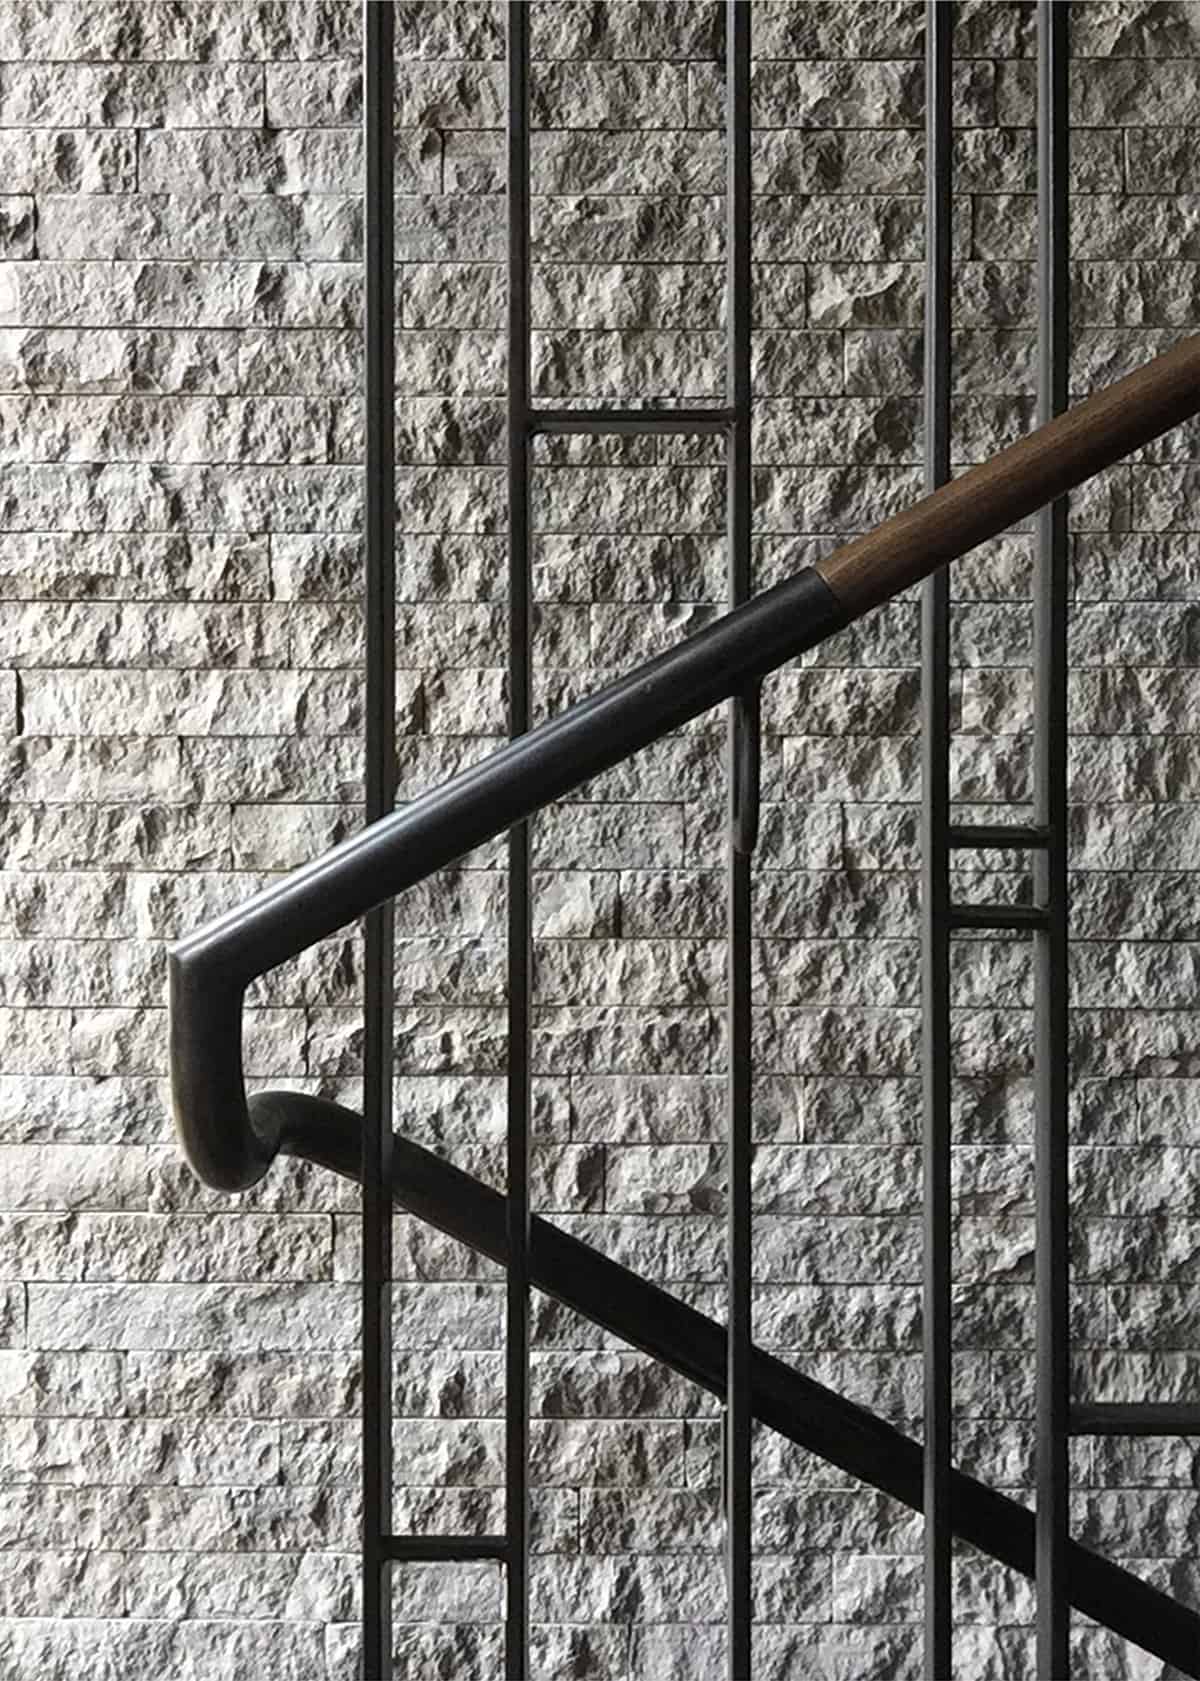 midcentury-modern-staircase